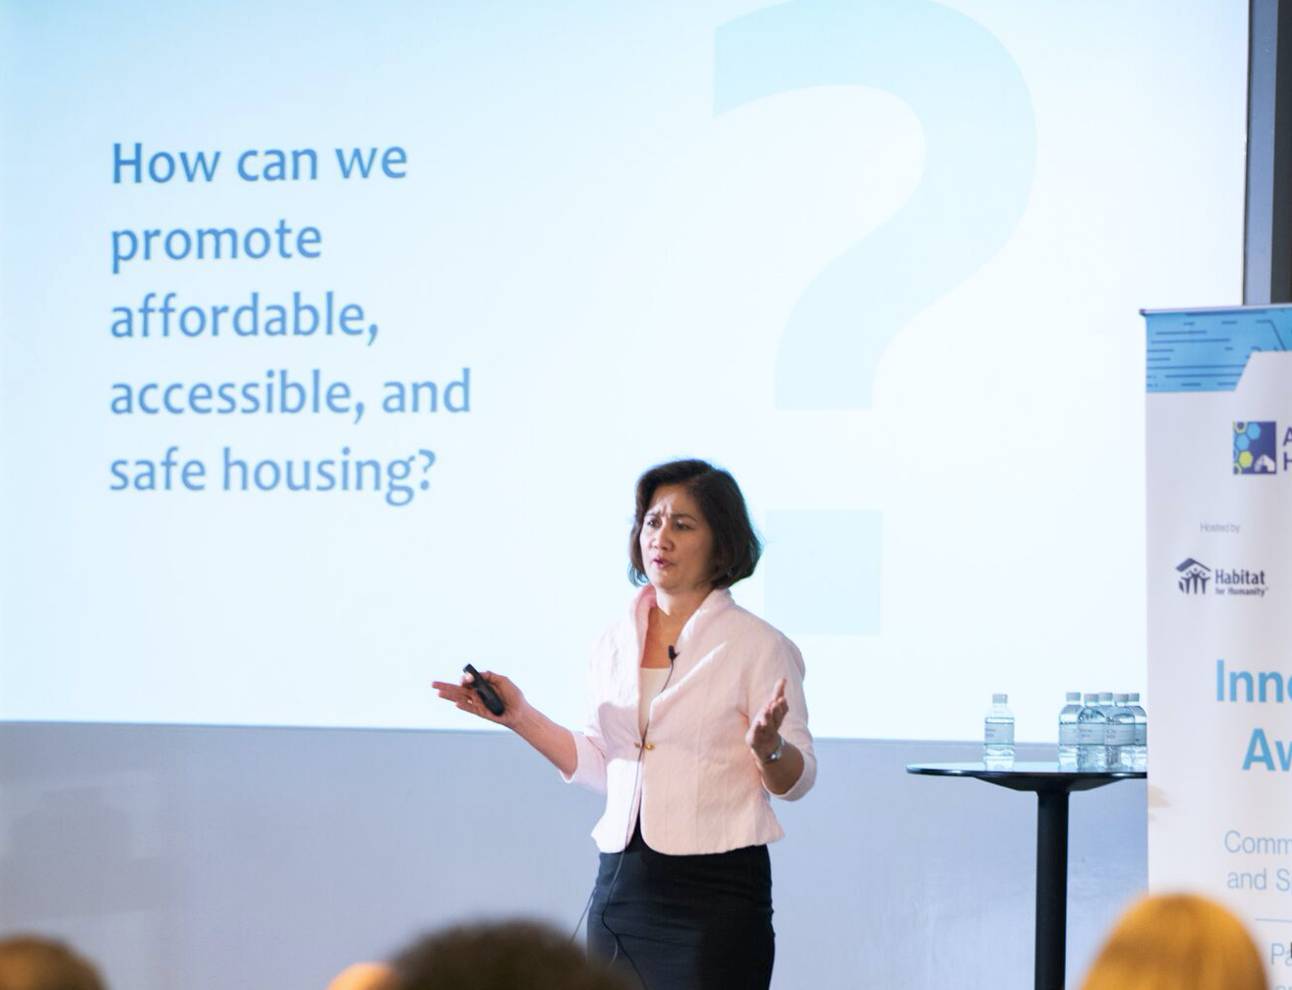 Innovation Awards at the Virtual Asia-Pacific Housing Forum